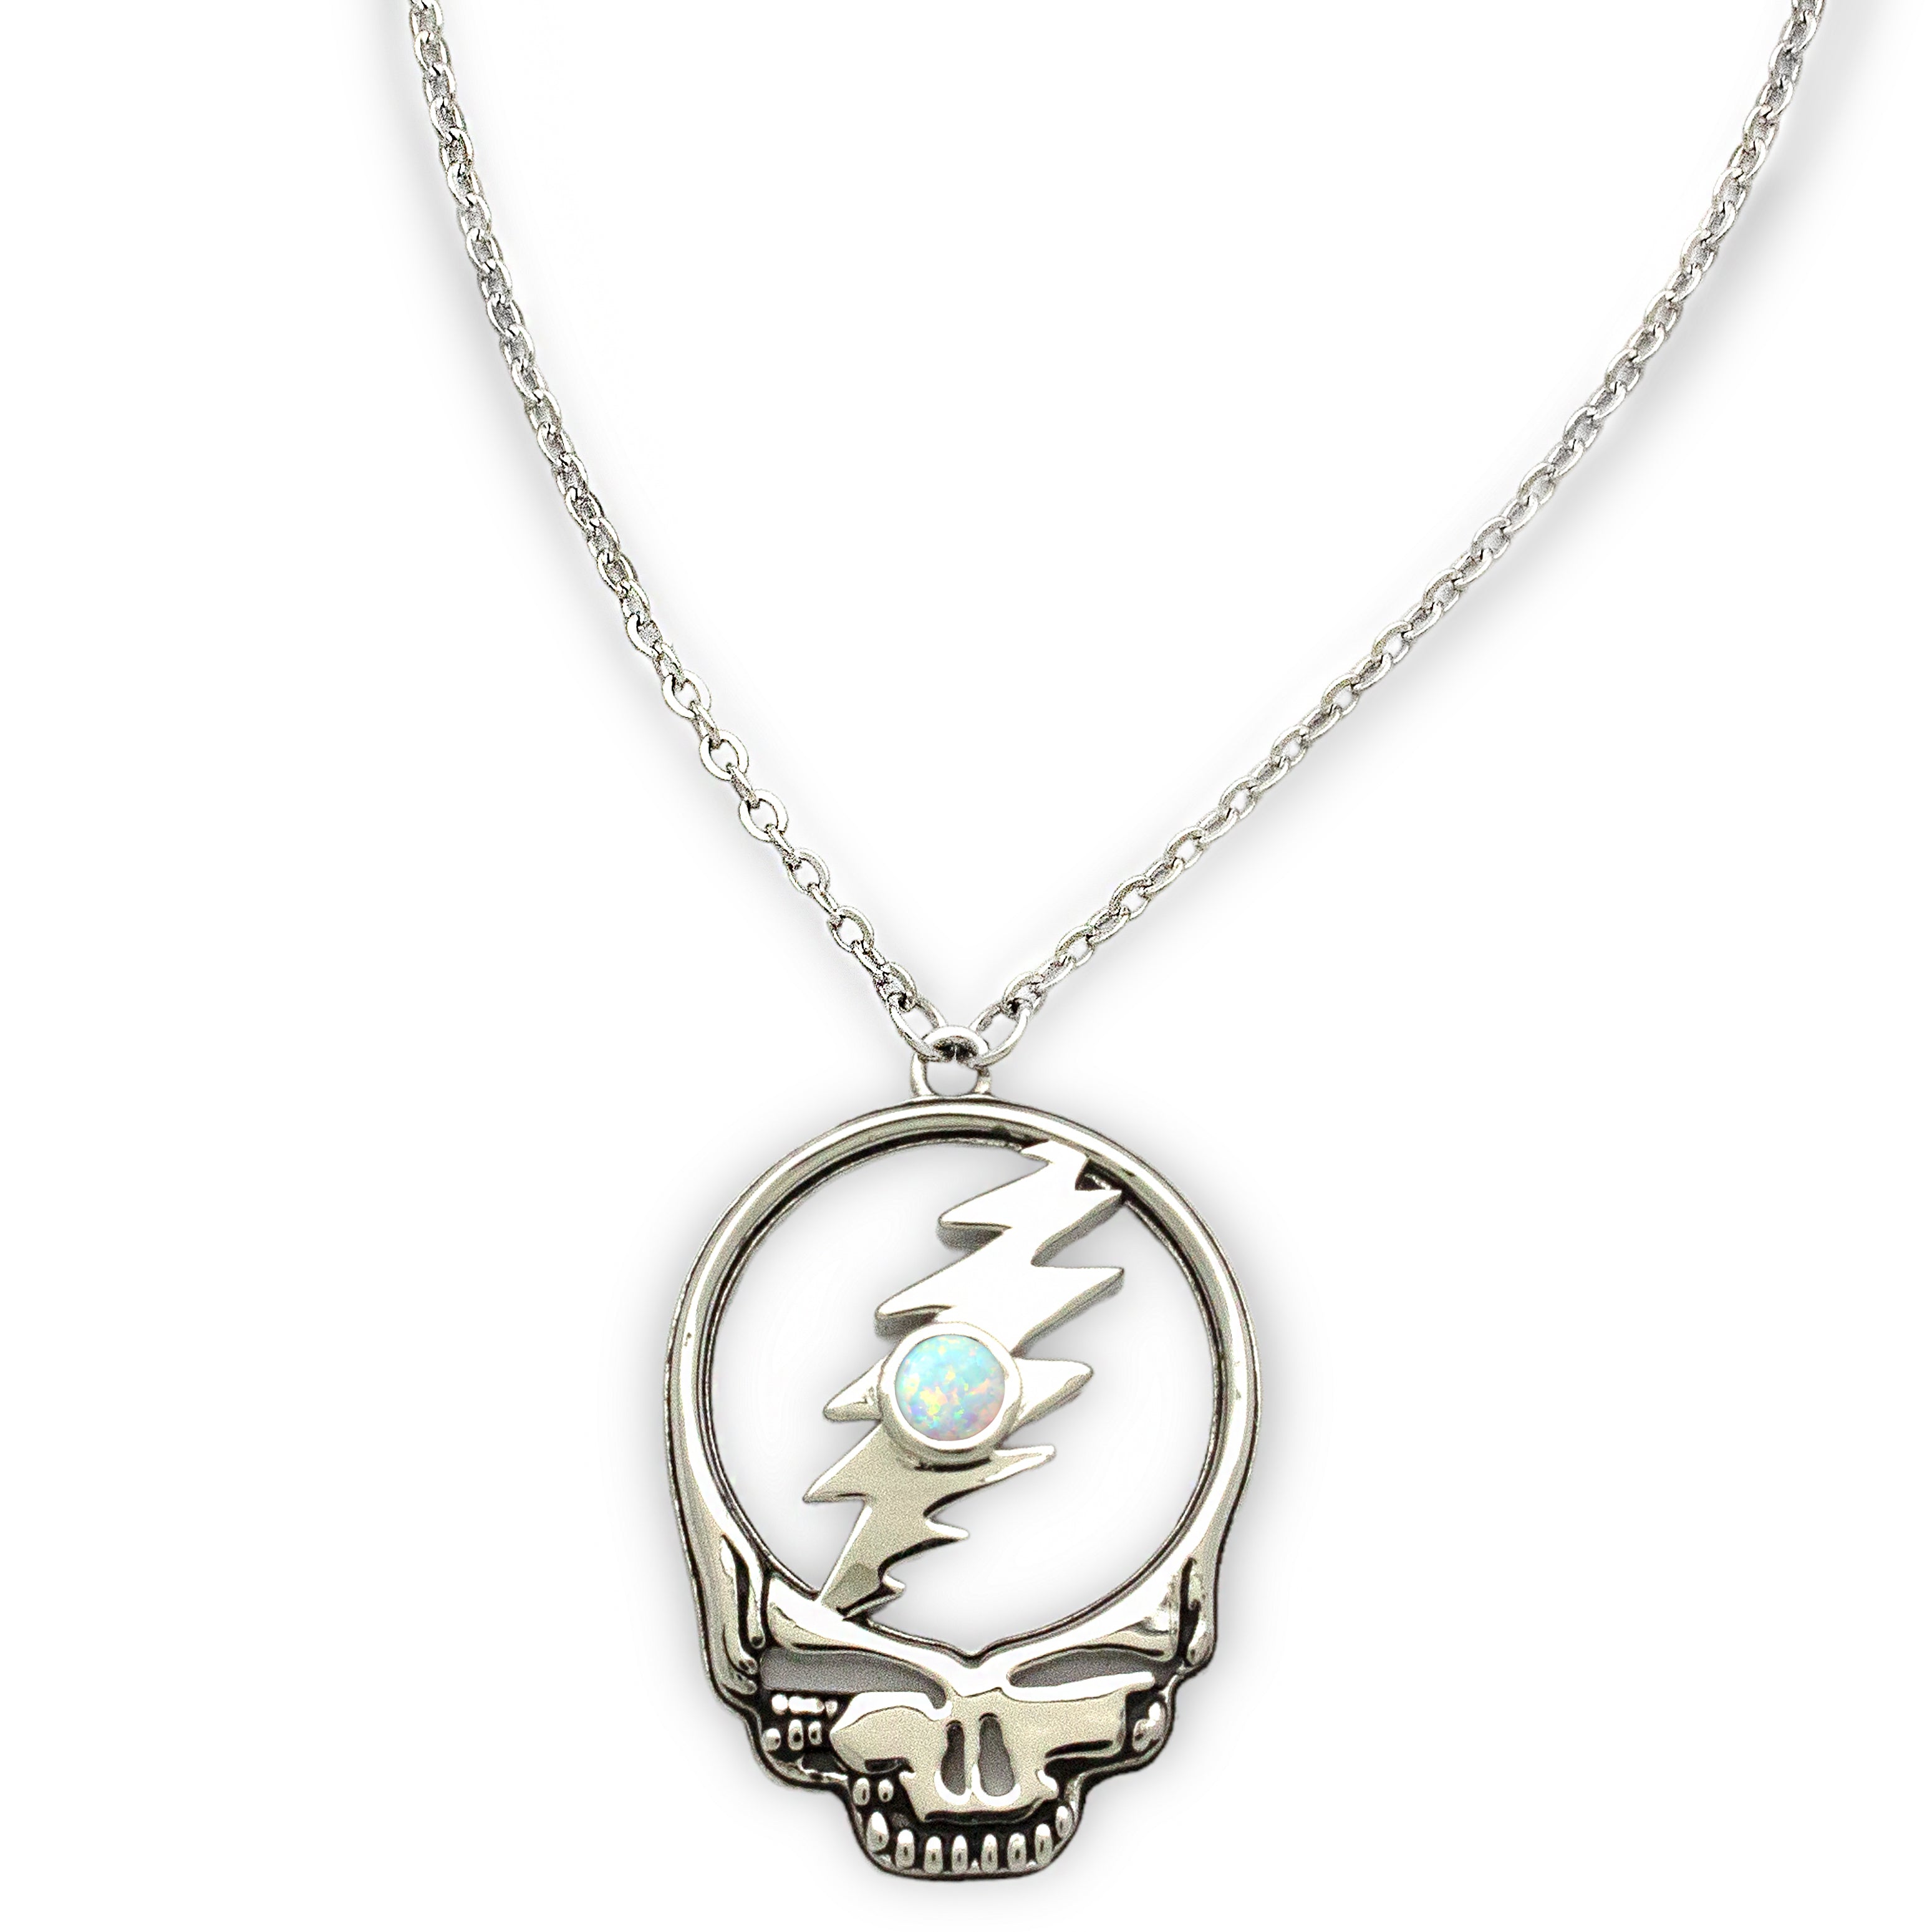 Tiny Silver Birthstone Necklace - Pick your month - House of Alyssa Smith